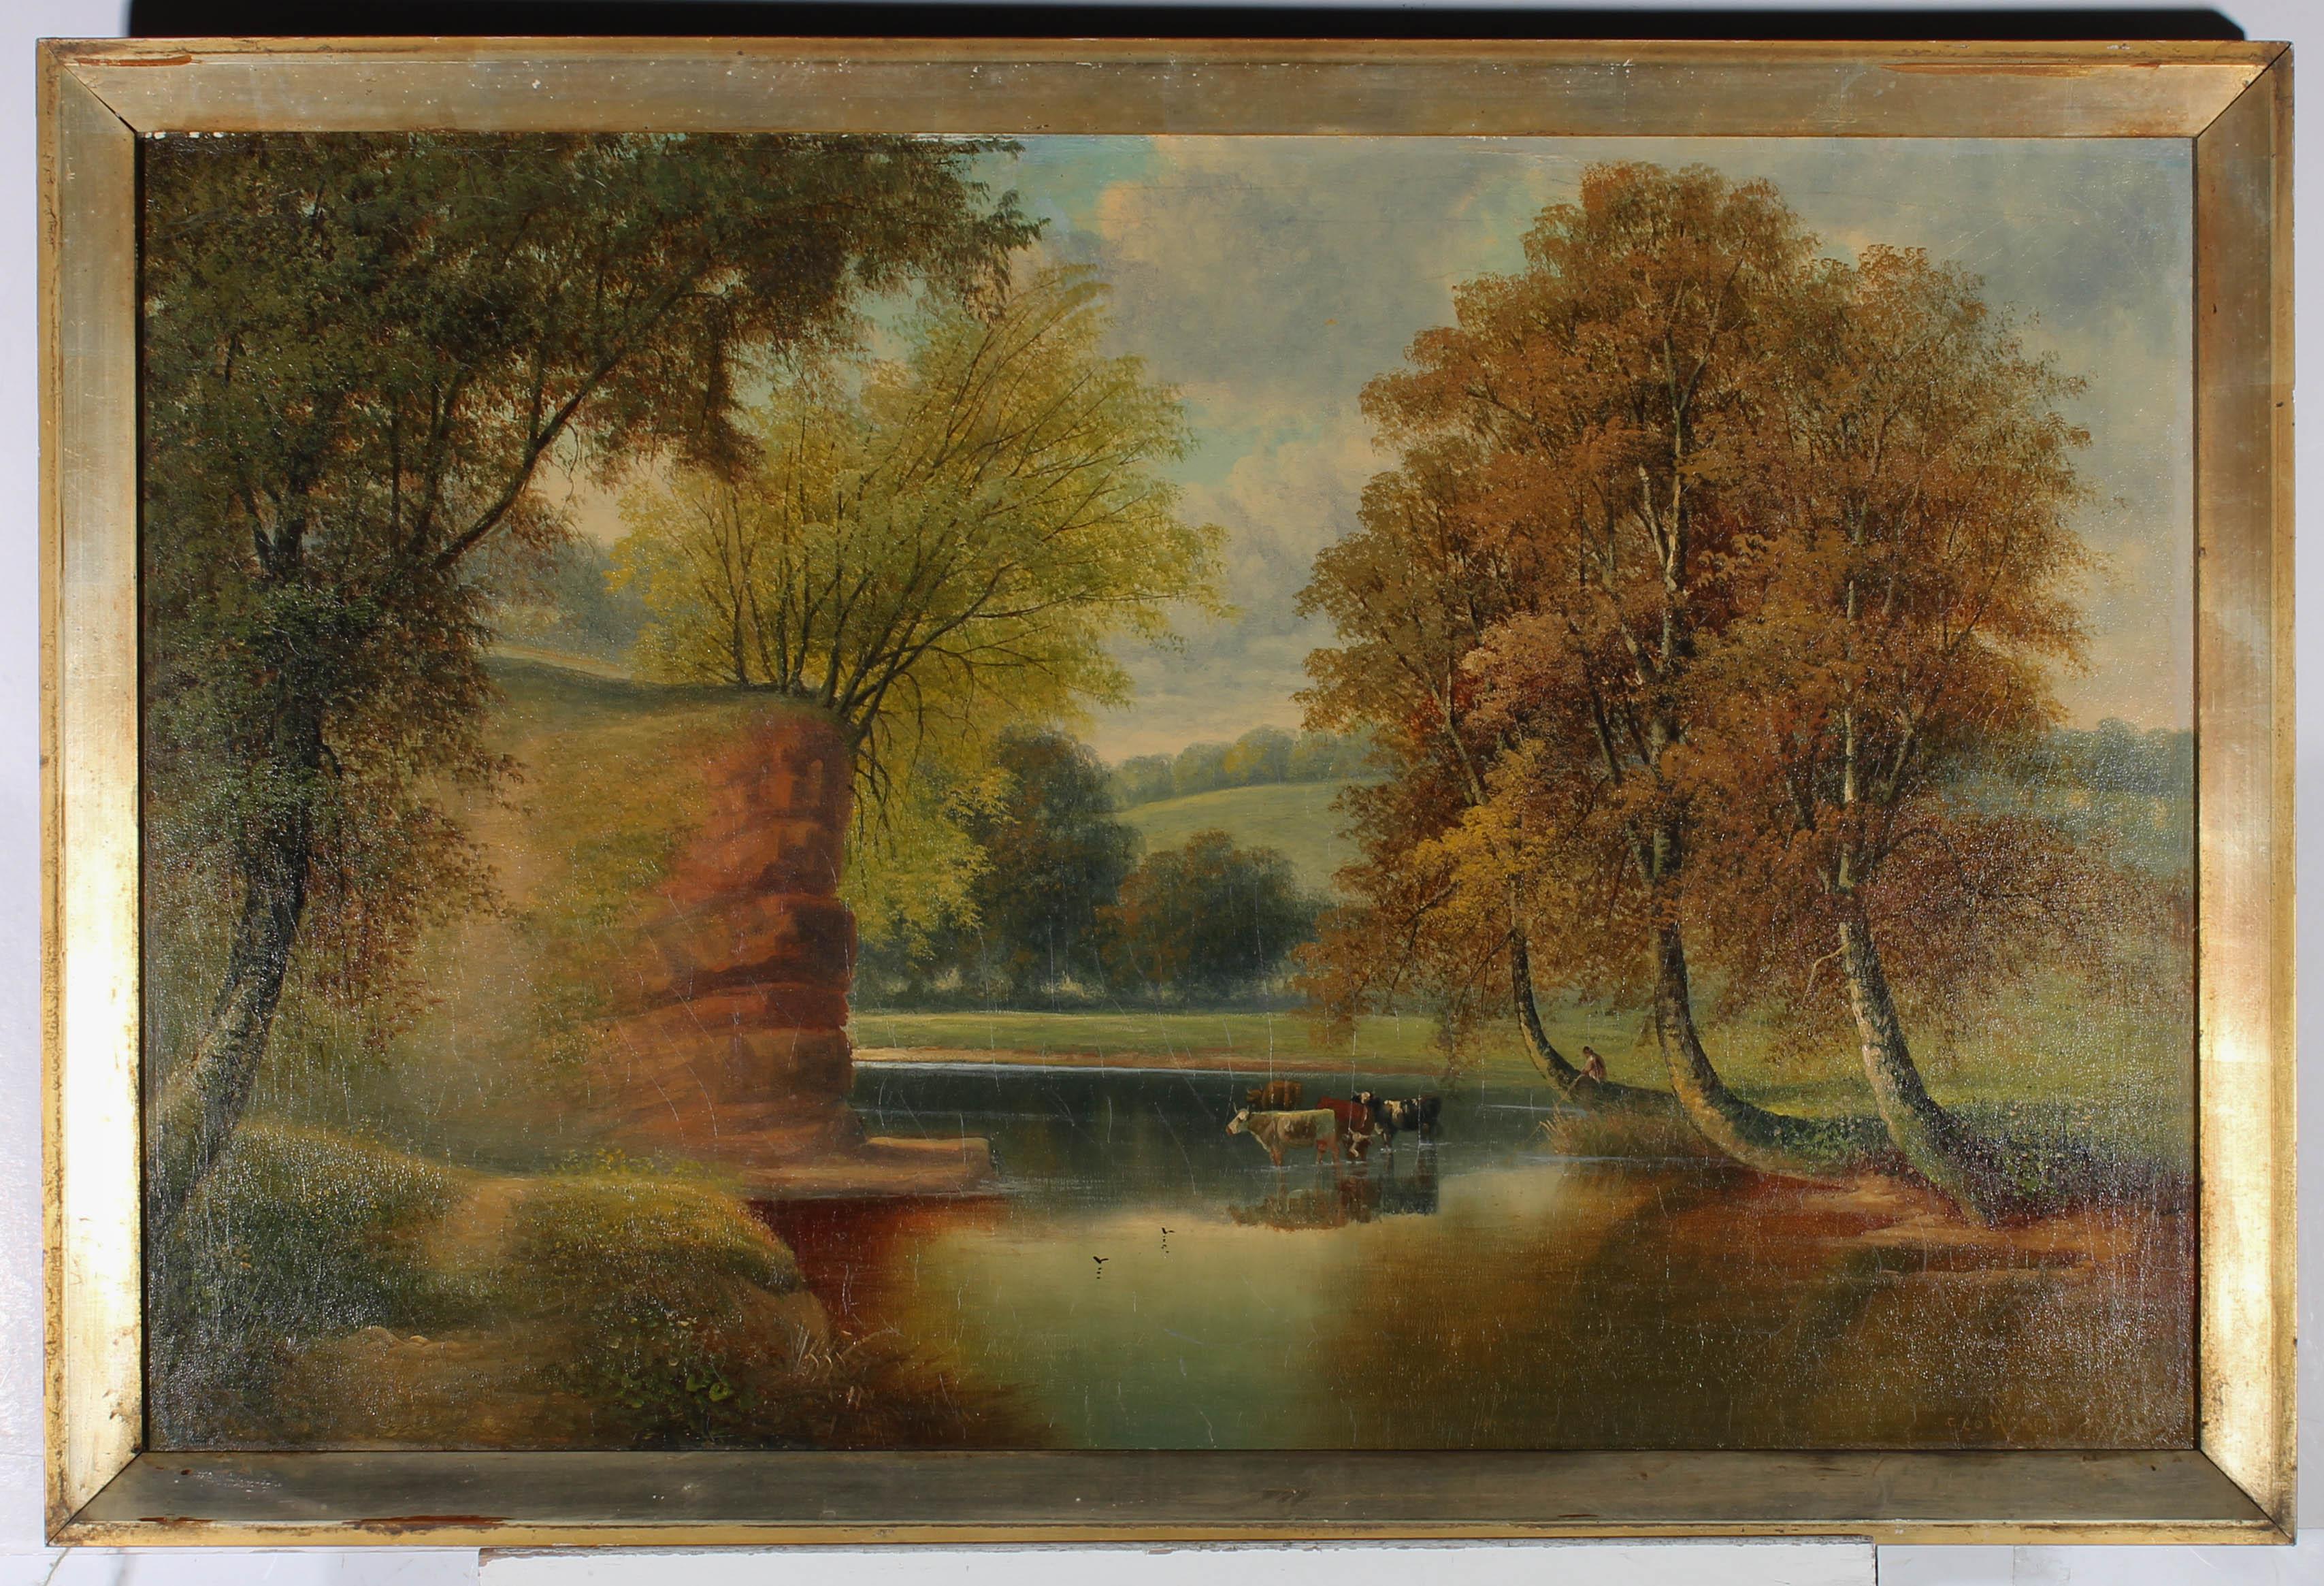 A fine early 20th Century ;landscape in oil, showing a bucolic scene of cattle drinking in the shallows of a river as a figure watches them from a tree on the bank. The leaves of the surrounding trees are turning from summer green to the browns and